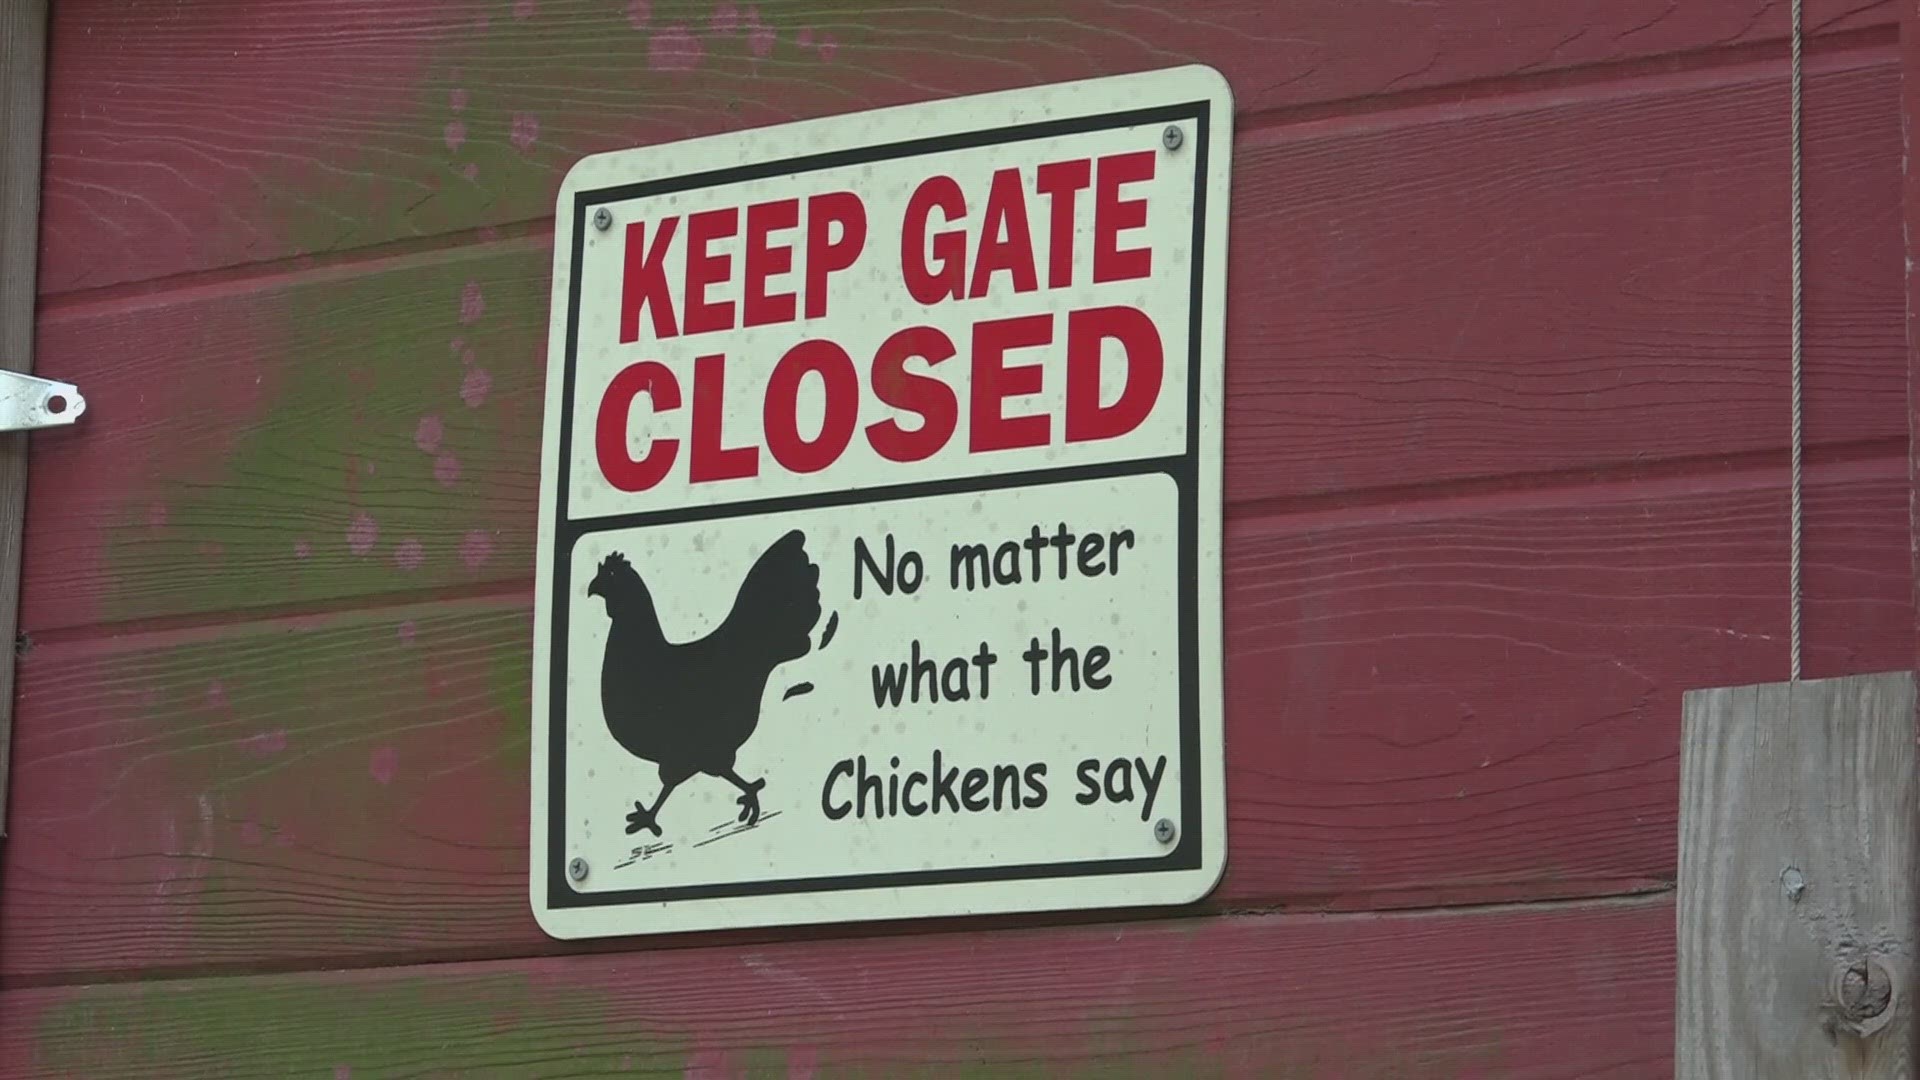 Belleville considers ordinance allowing backyard chicken coops in city limits. Chickens have historically been banned in the Belleville city limits.